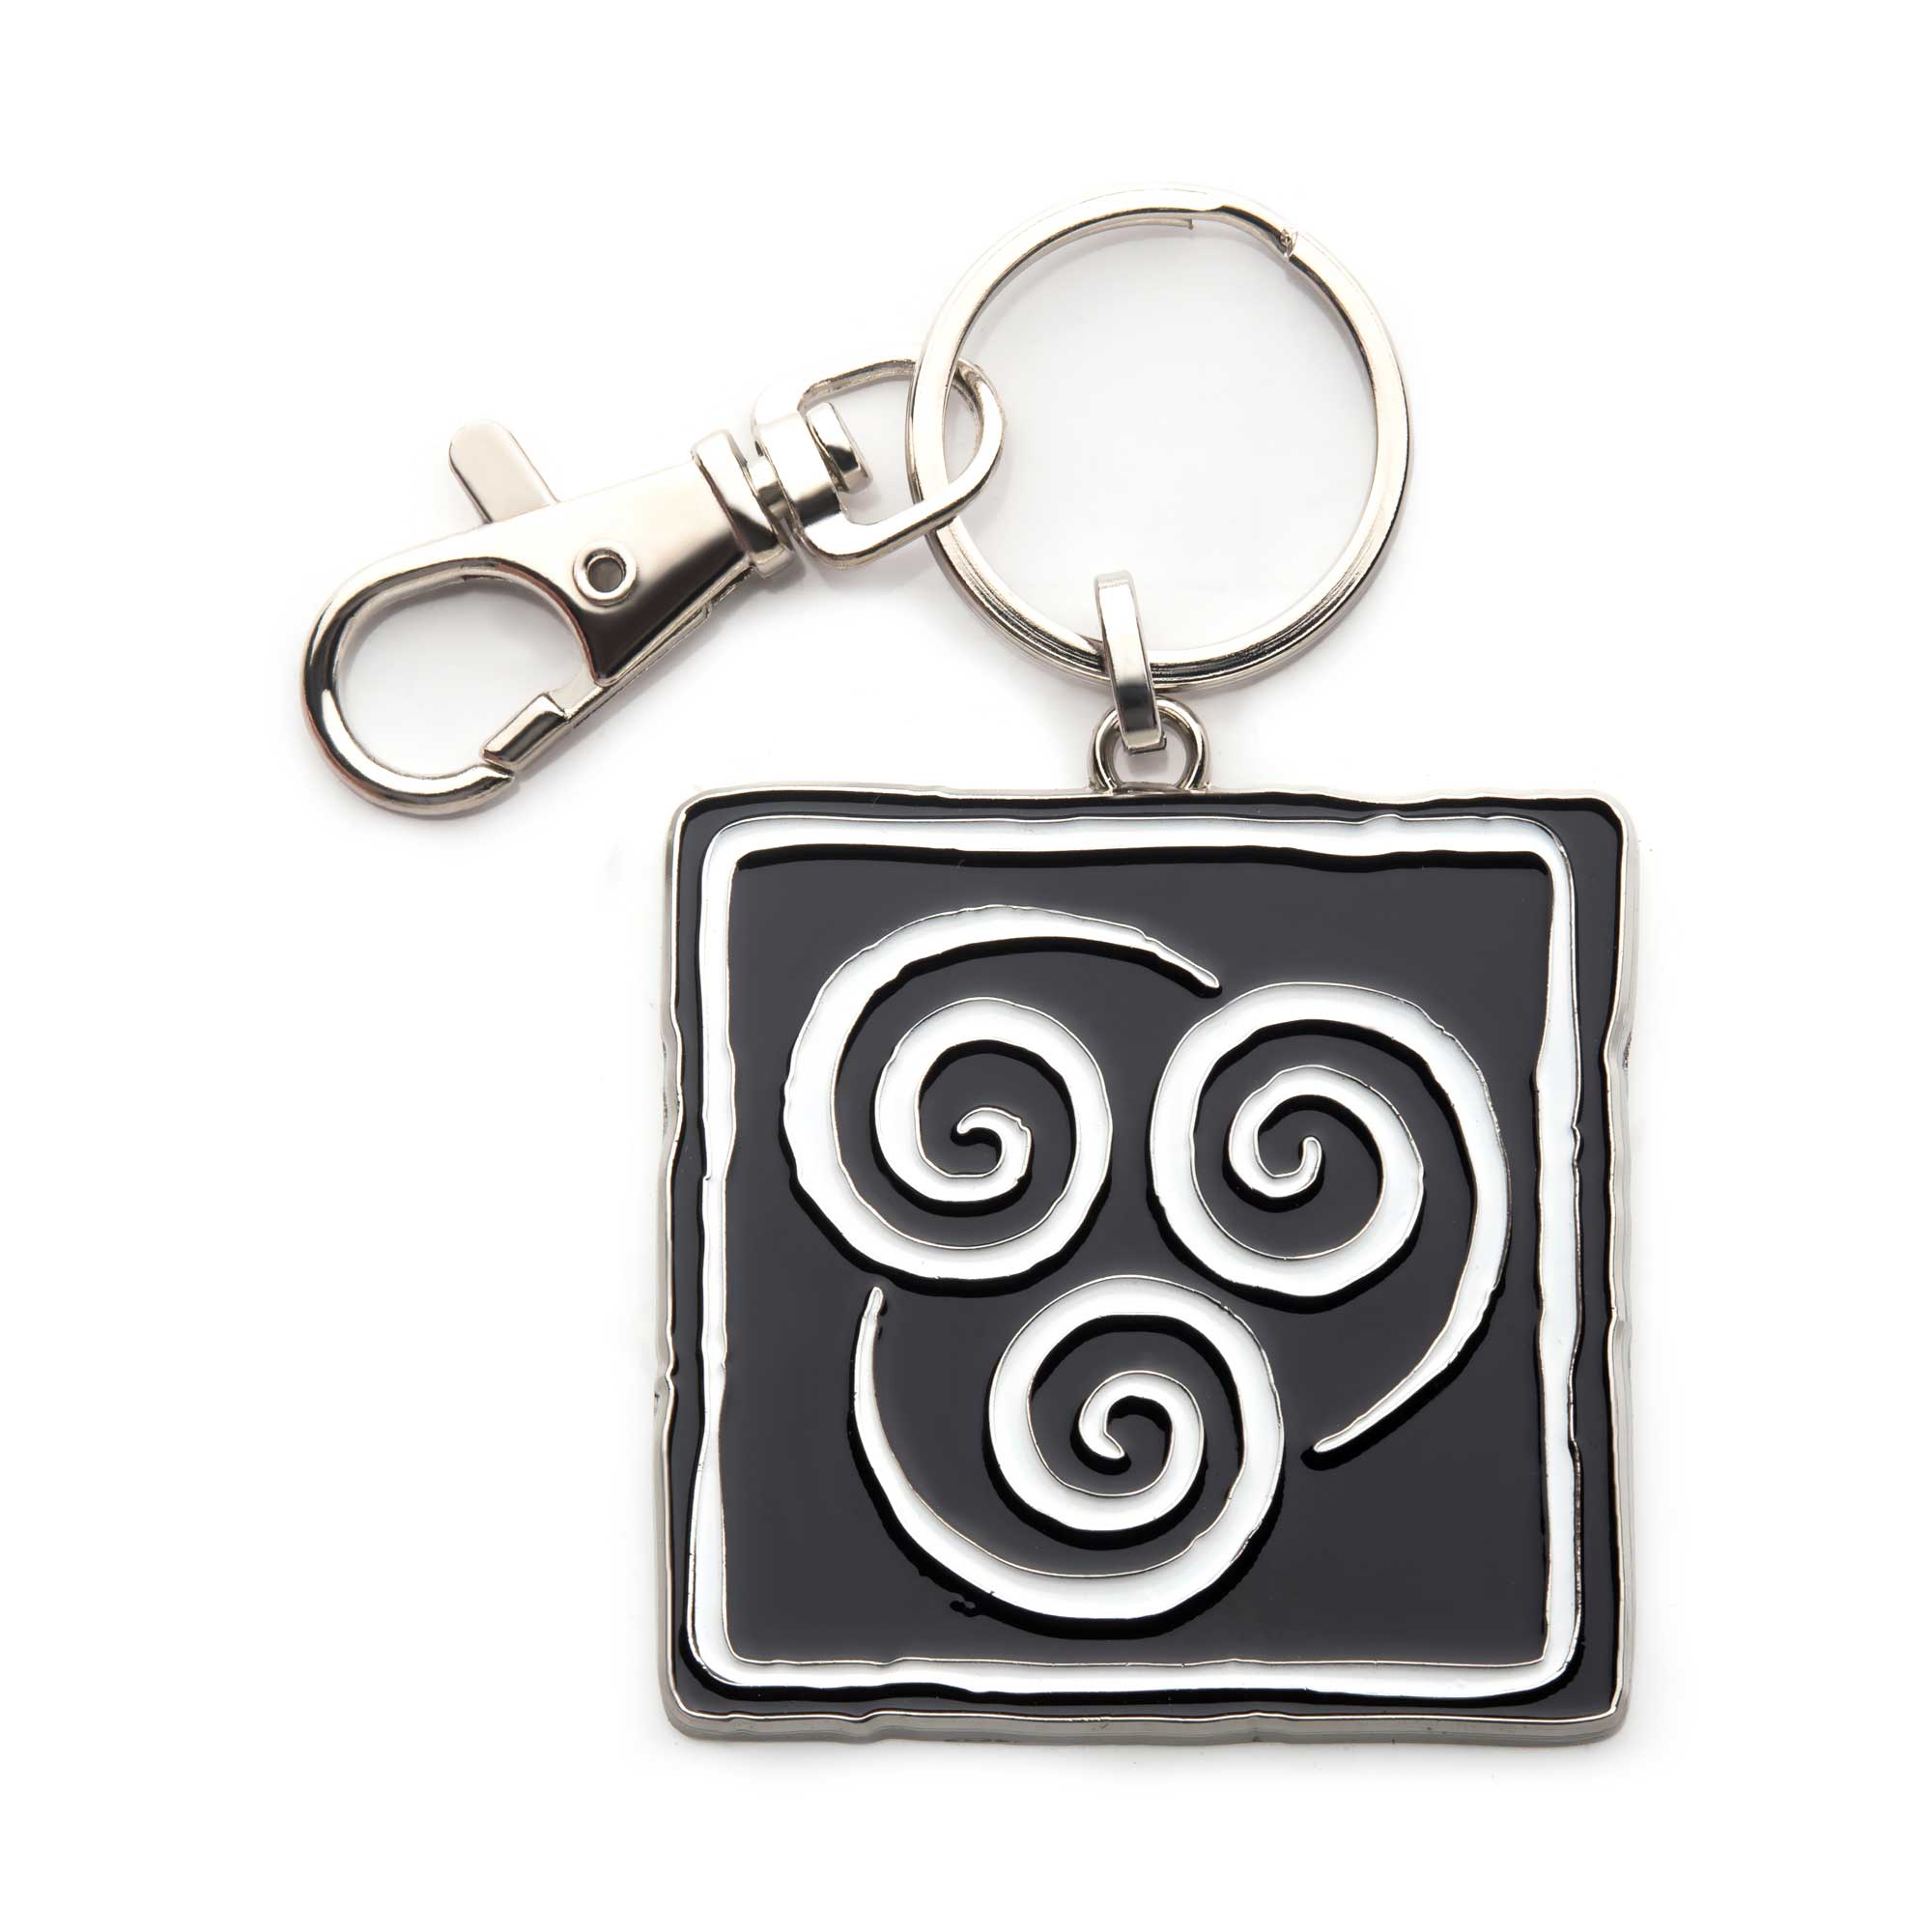 Nickelodeon Avatar: The Last Airbender The Air Nomads Symbol Keychain